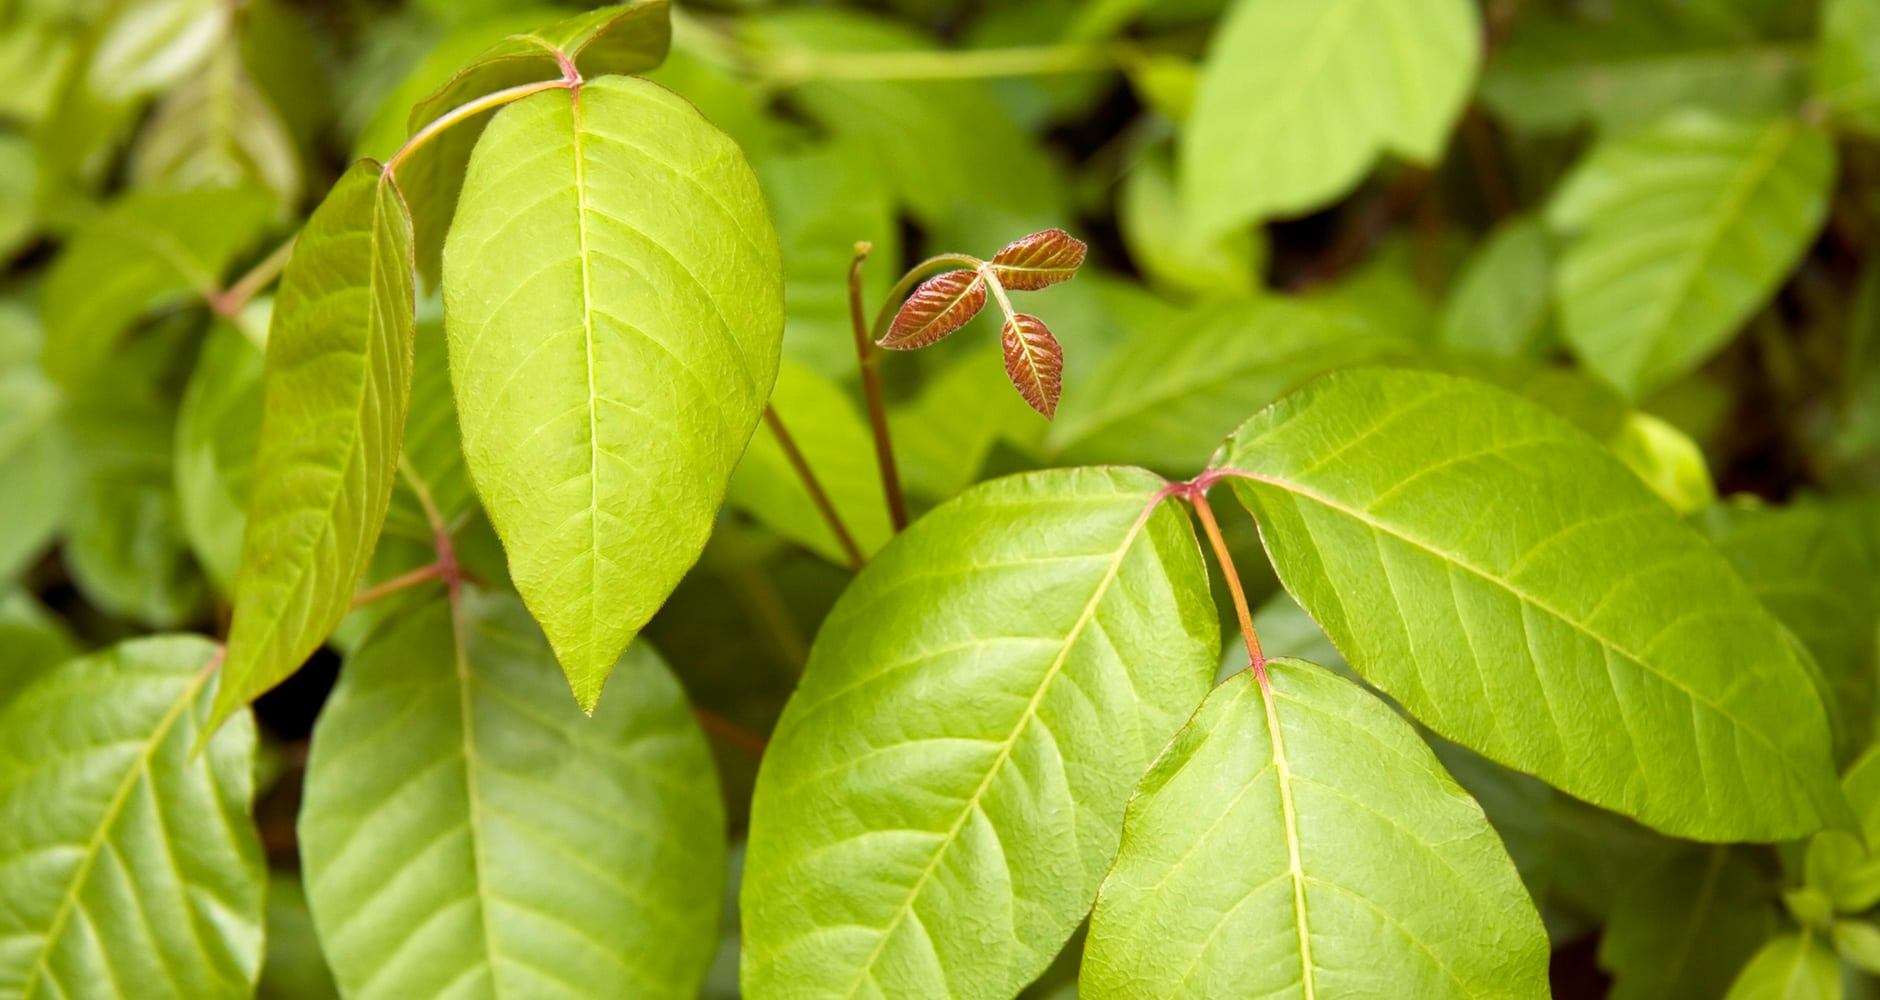 6 Tips For Removing Poison Ivy Plants - Farmers' Almanac